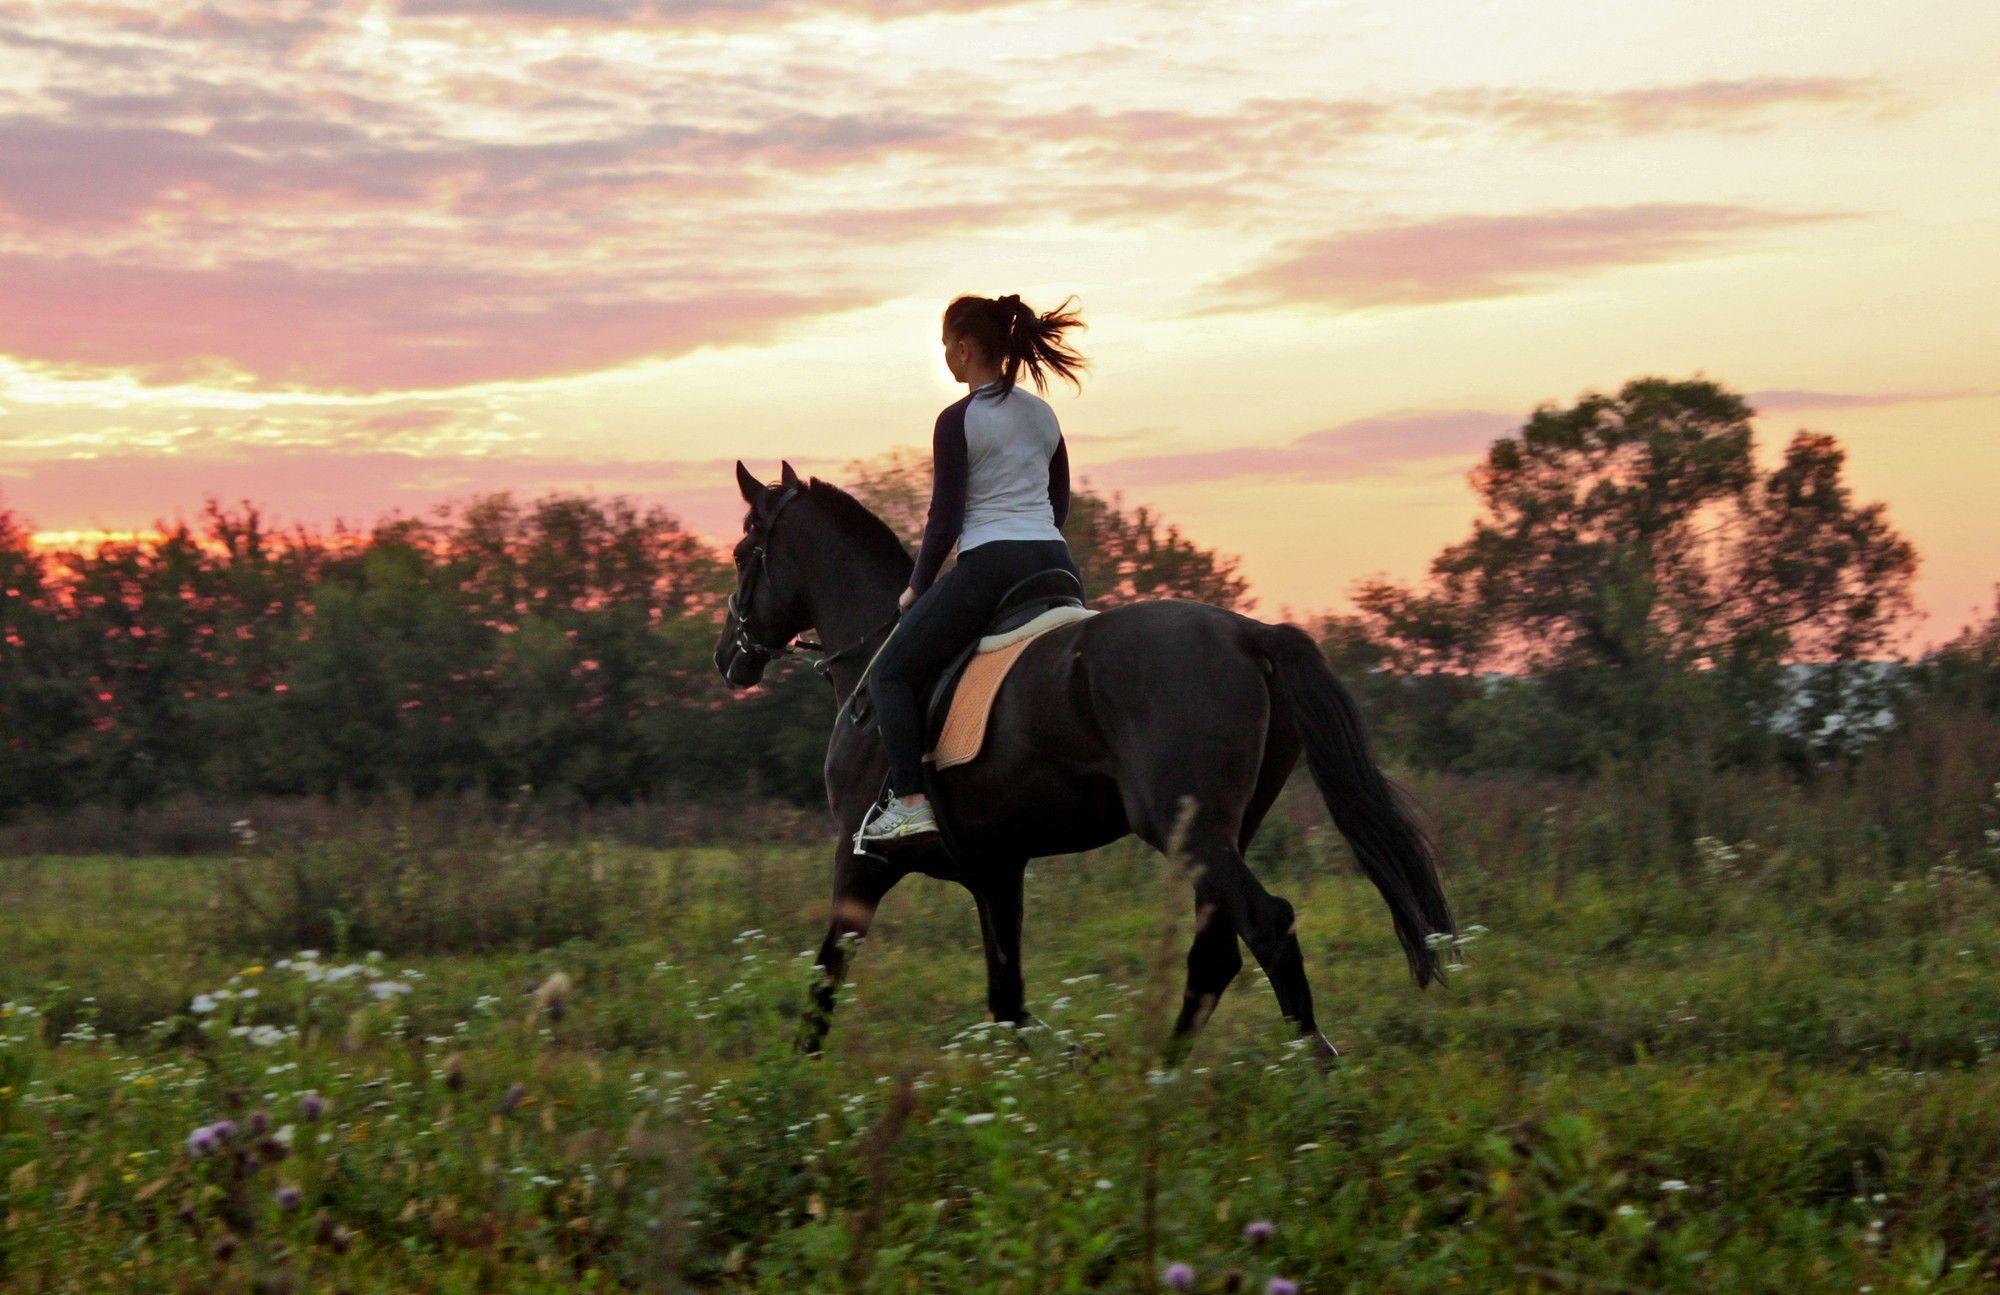 Horse riding, sunset wallpaper and image, picture